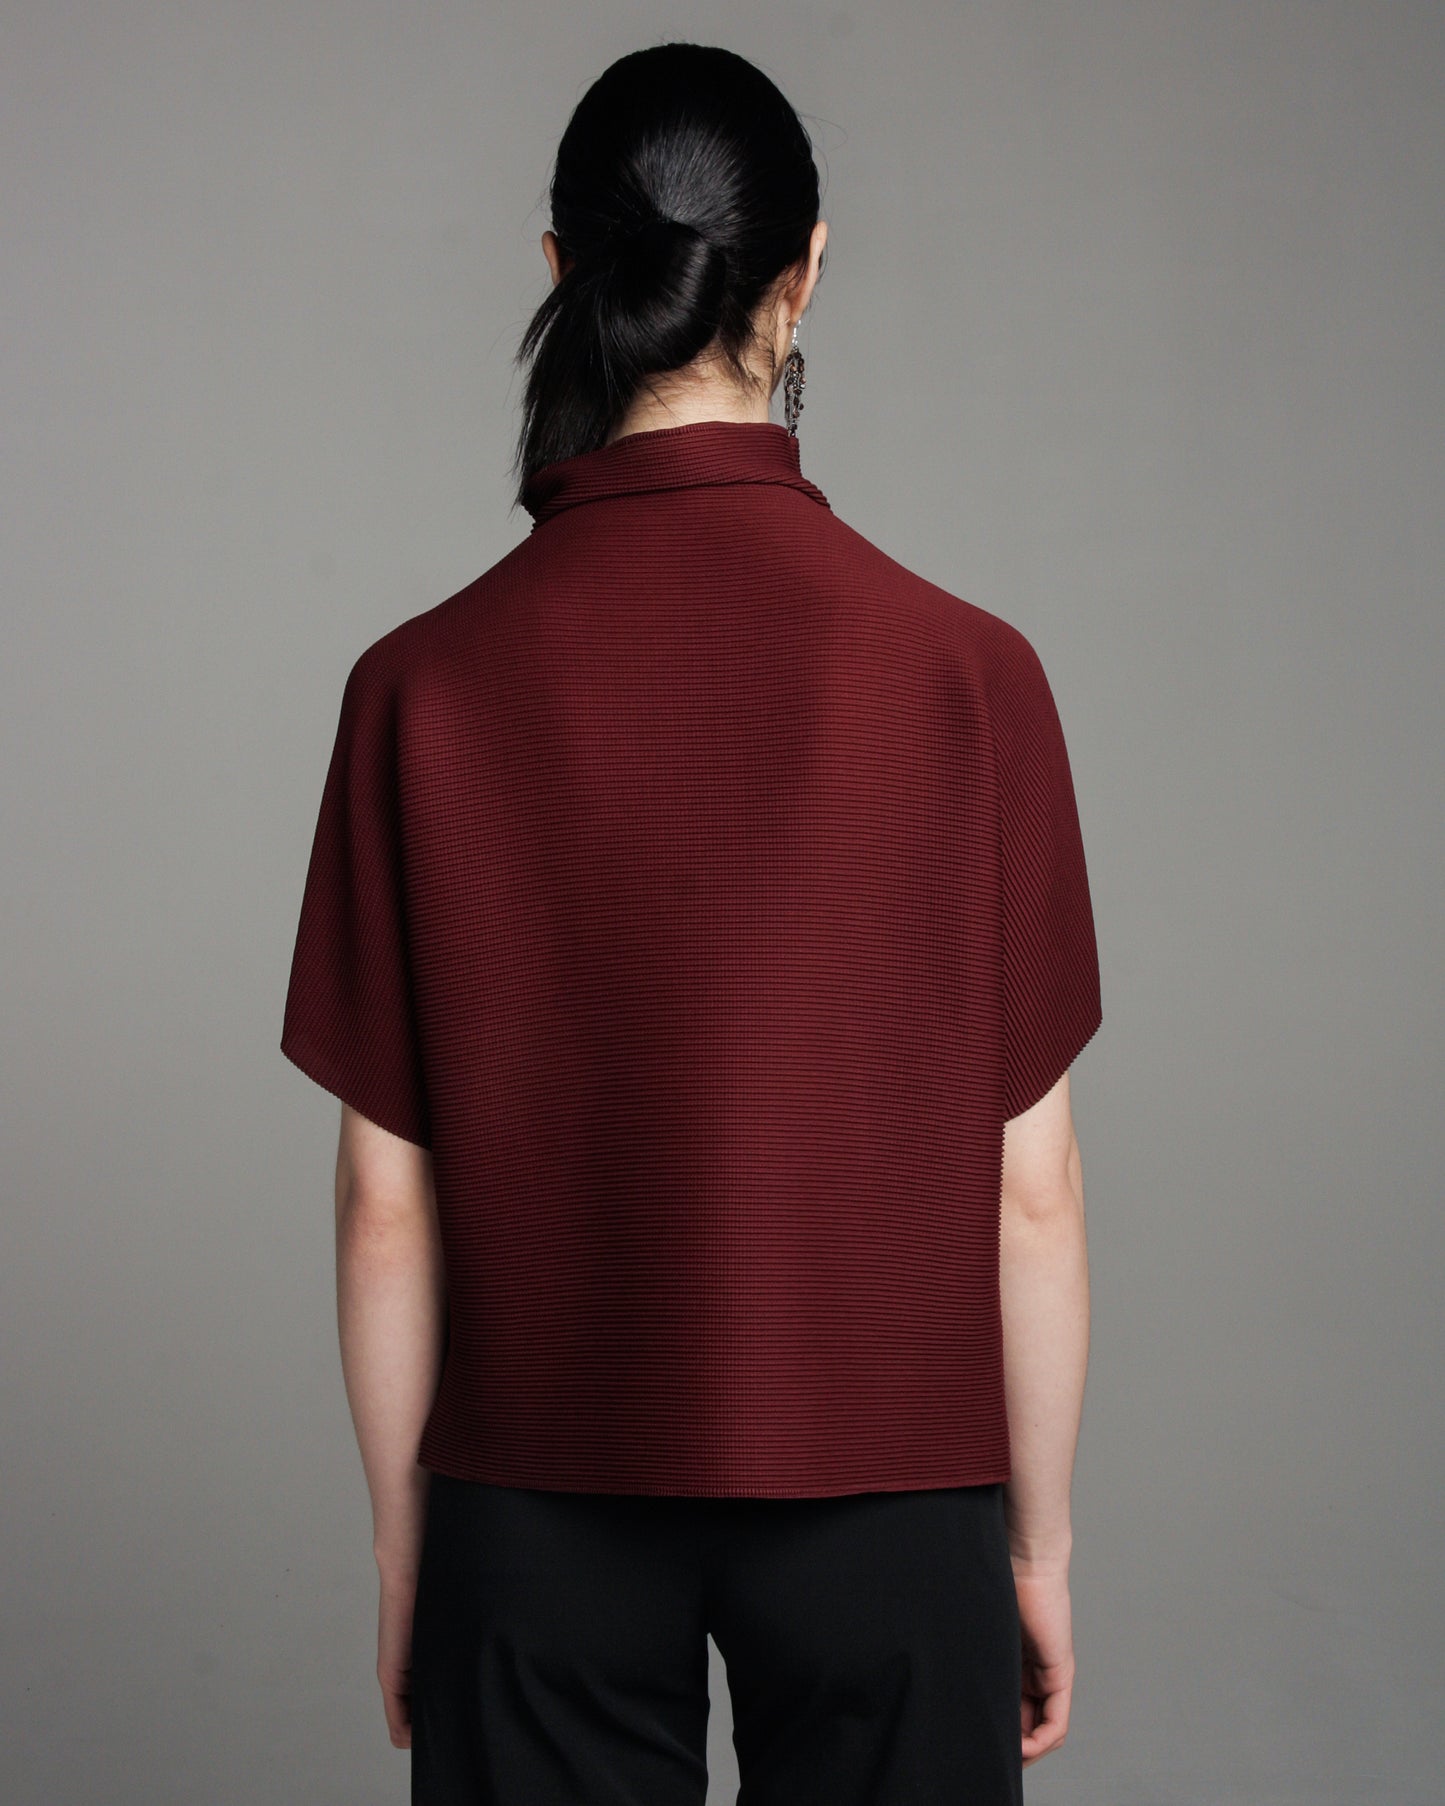 Loose Bordeaux Micropleat Top